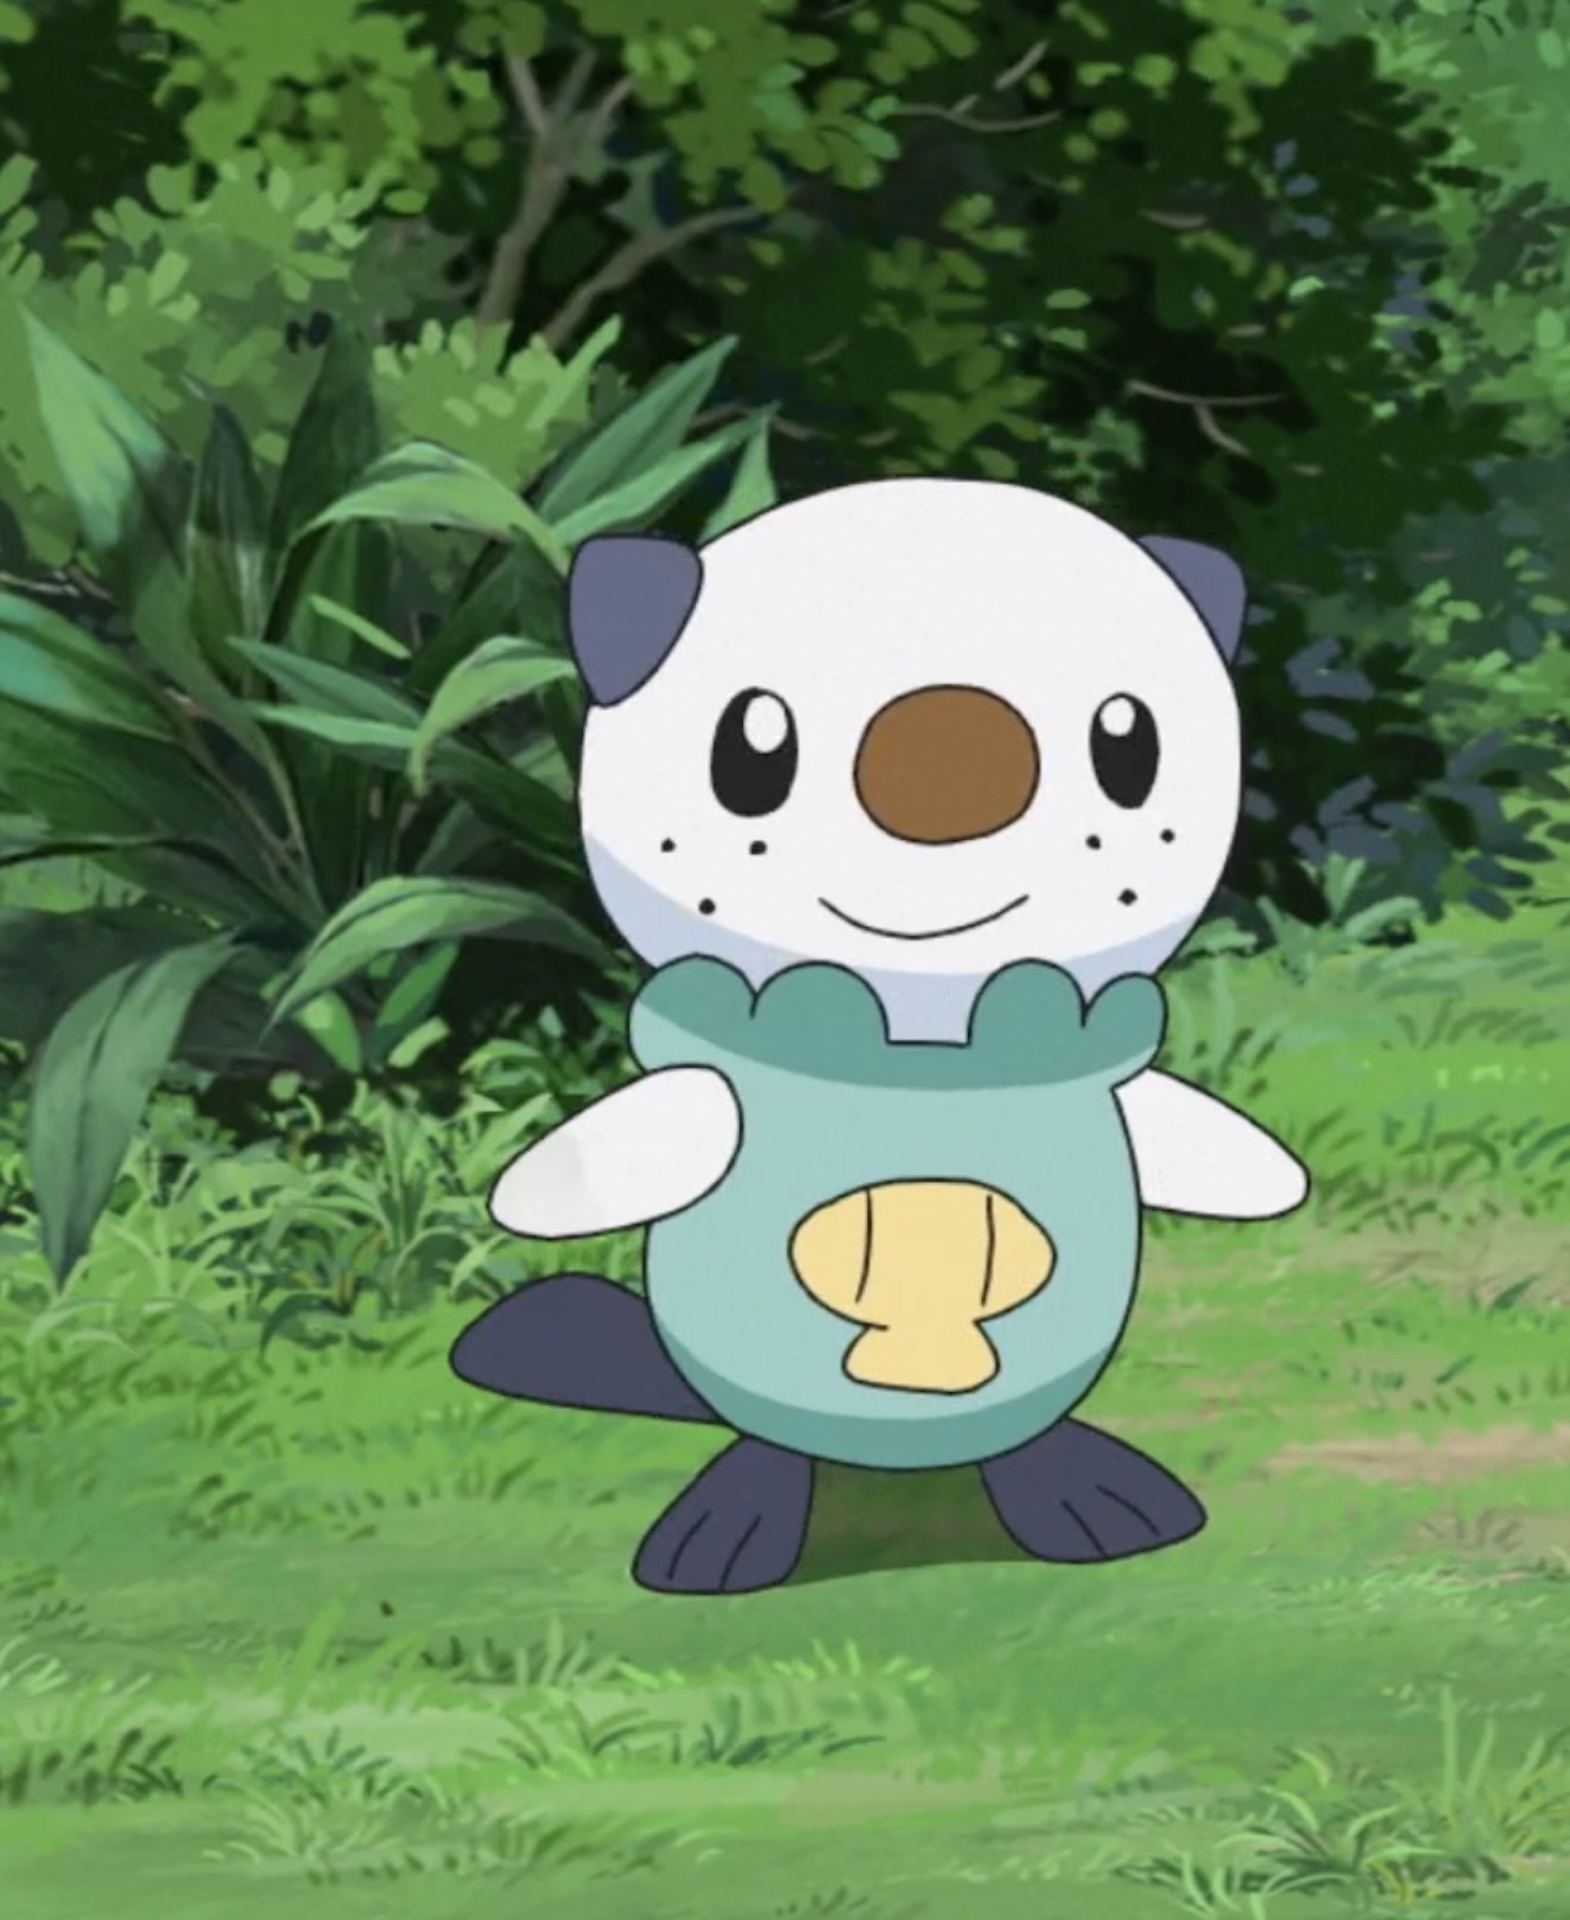 Pokémon: 10 Times Water Types Didn't Live Up To Their Potential In The Anime